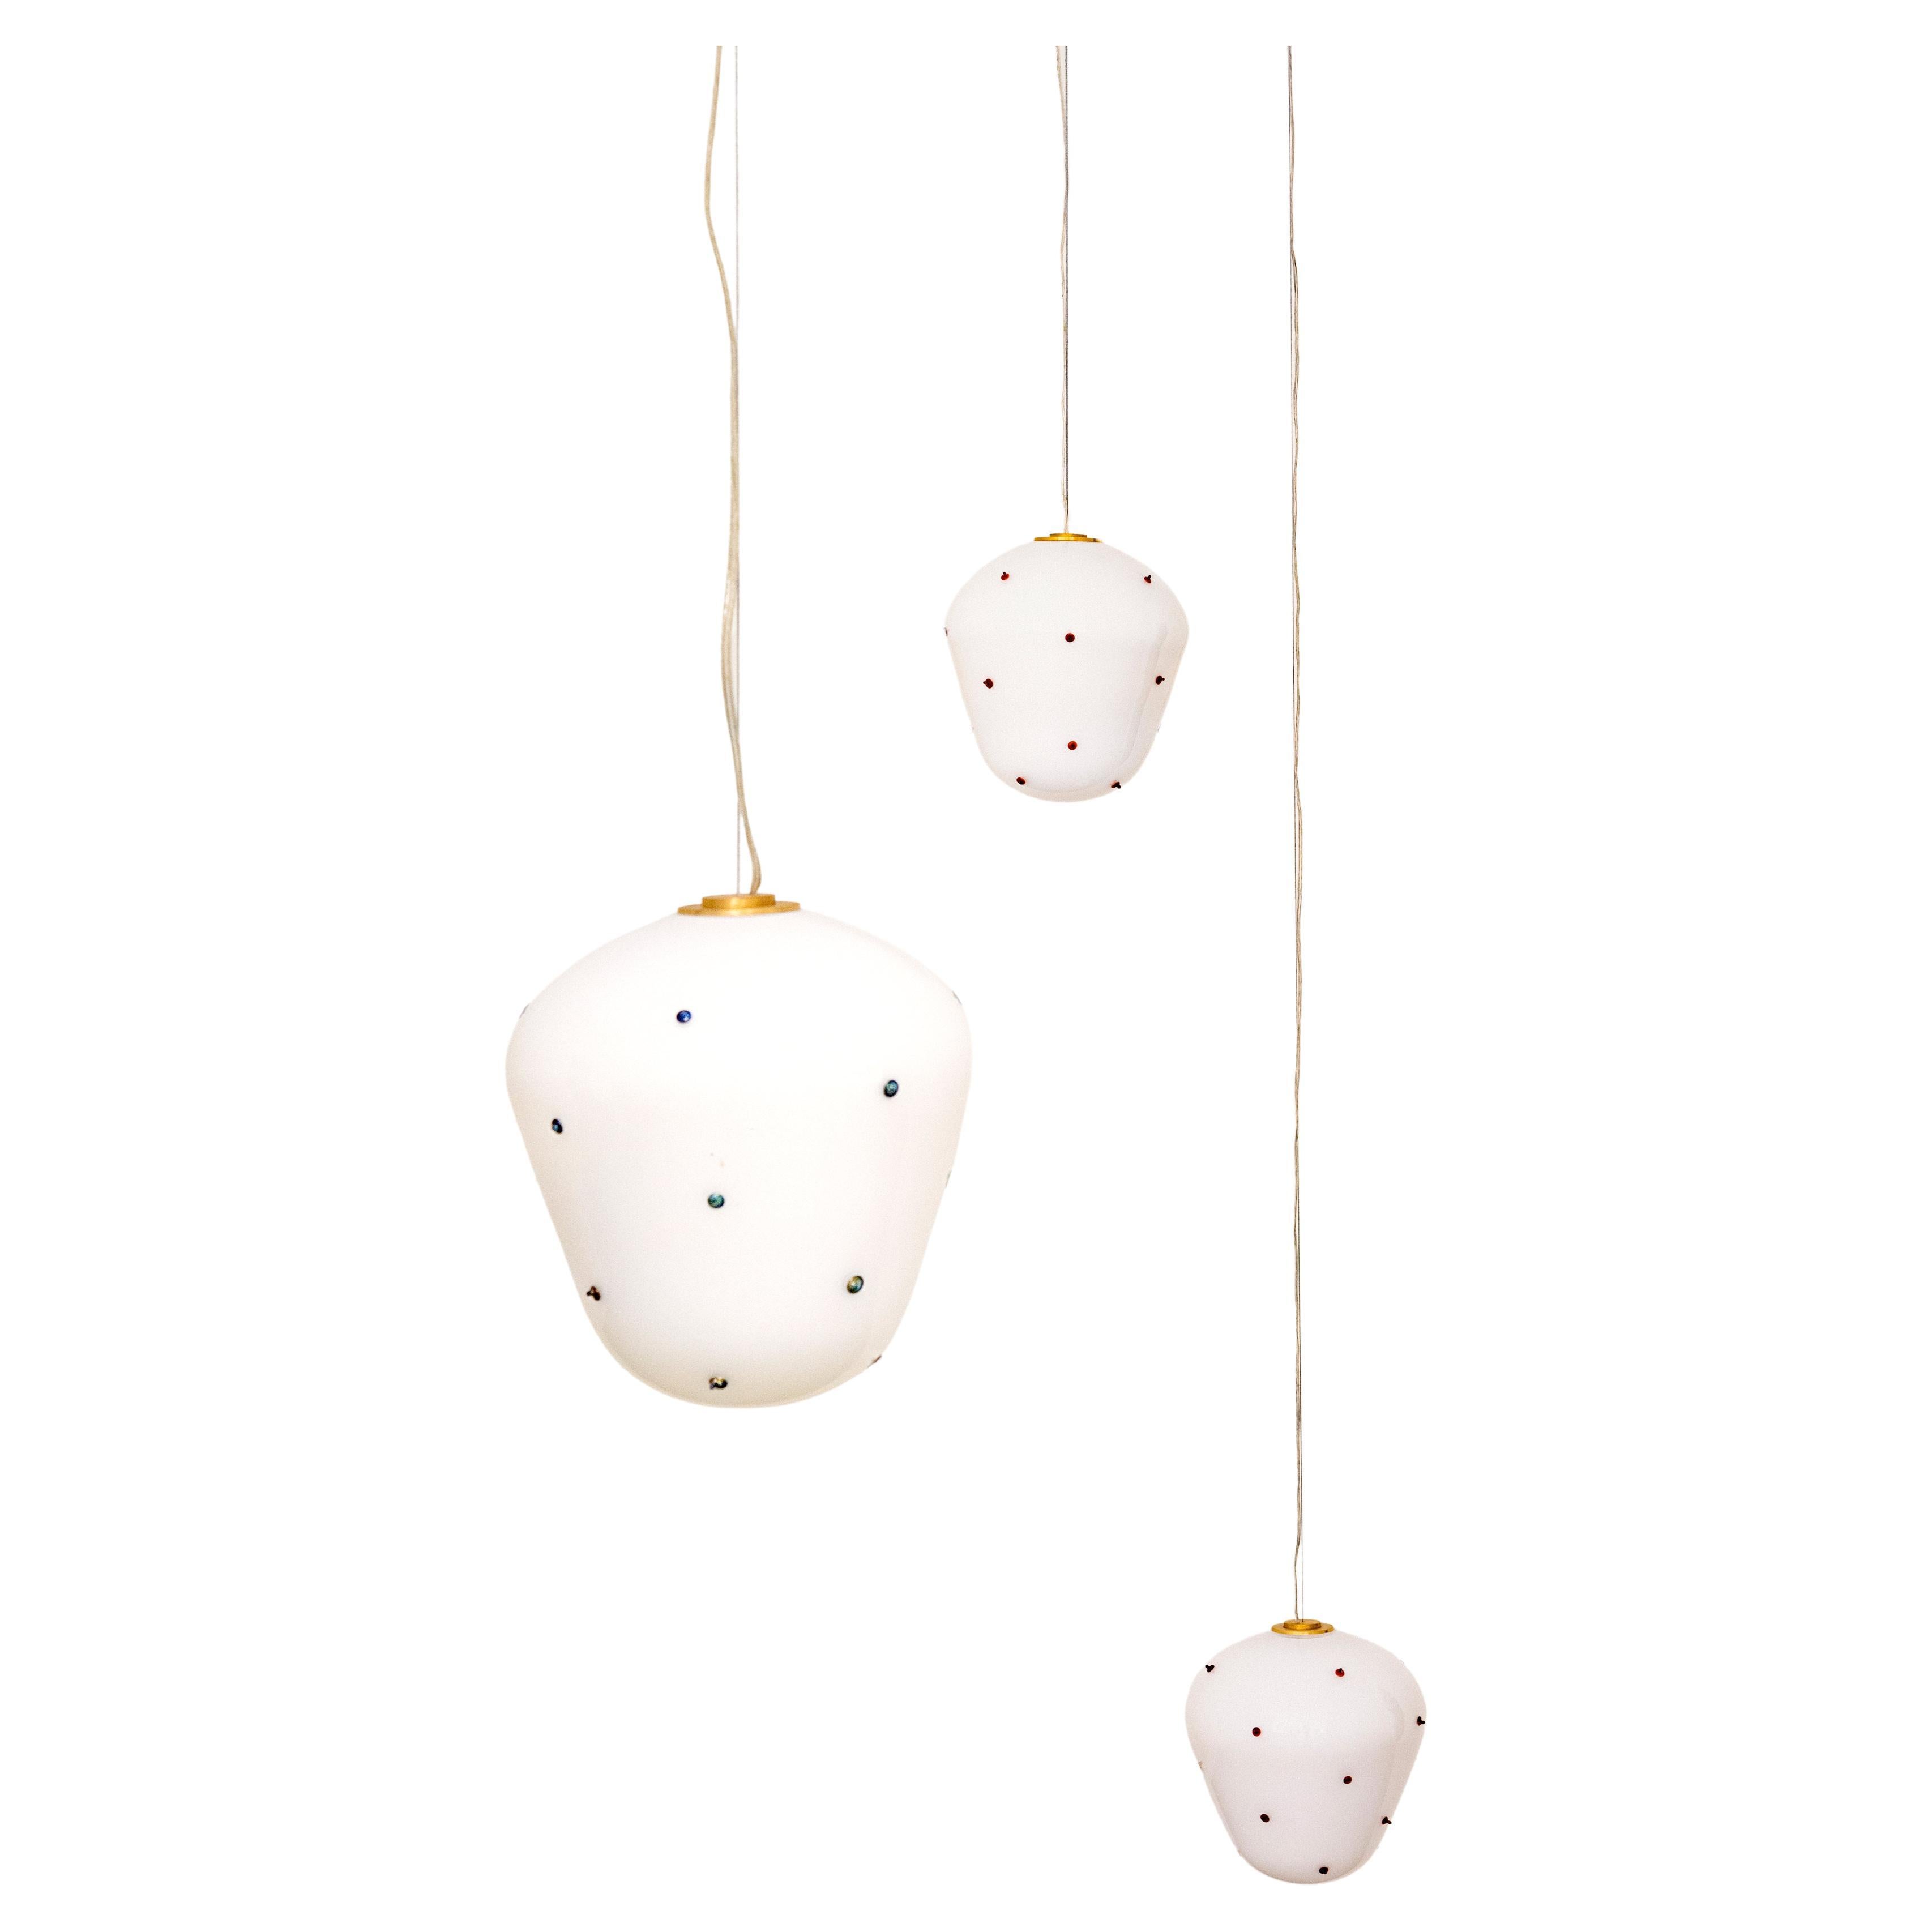 Berries blown glass pendant light designed by French designer Duo Marie & Alexandre.

The Berries collection is handblown in Paris by a master glassblower, patiently handblown without the use of molds.
This meticulous process allows for subtle